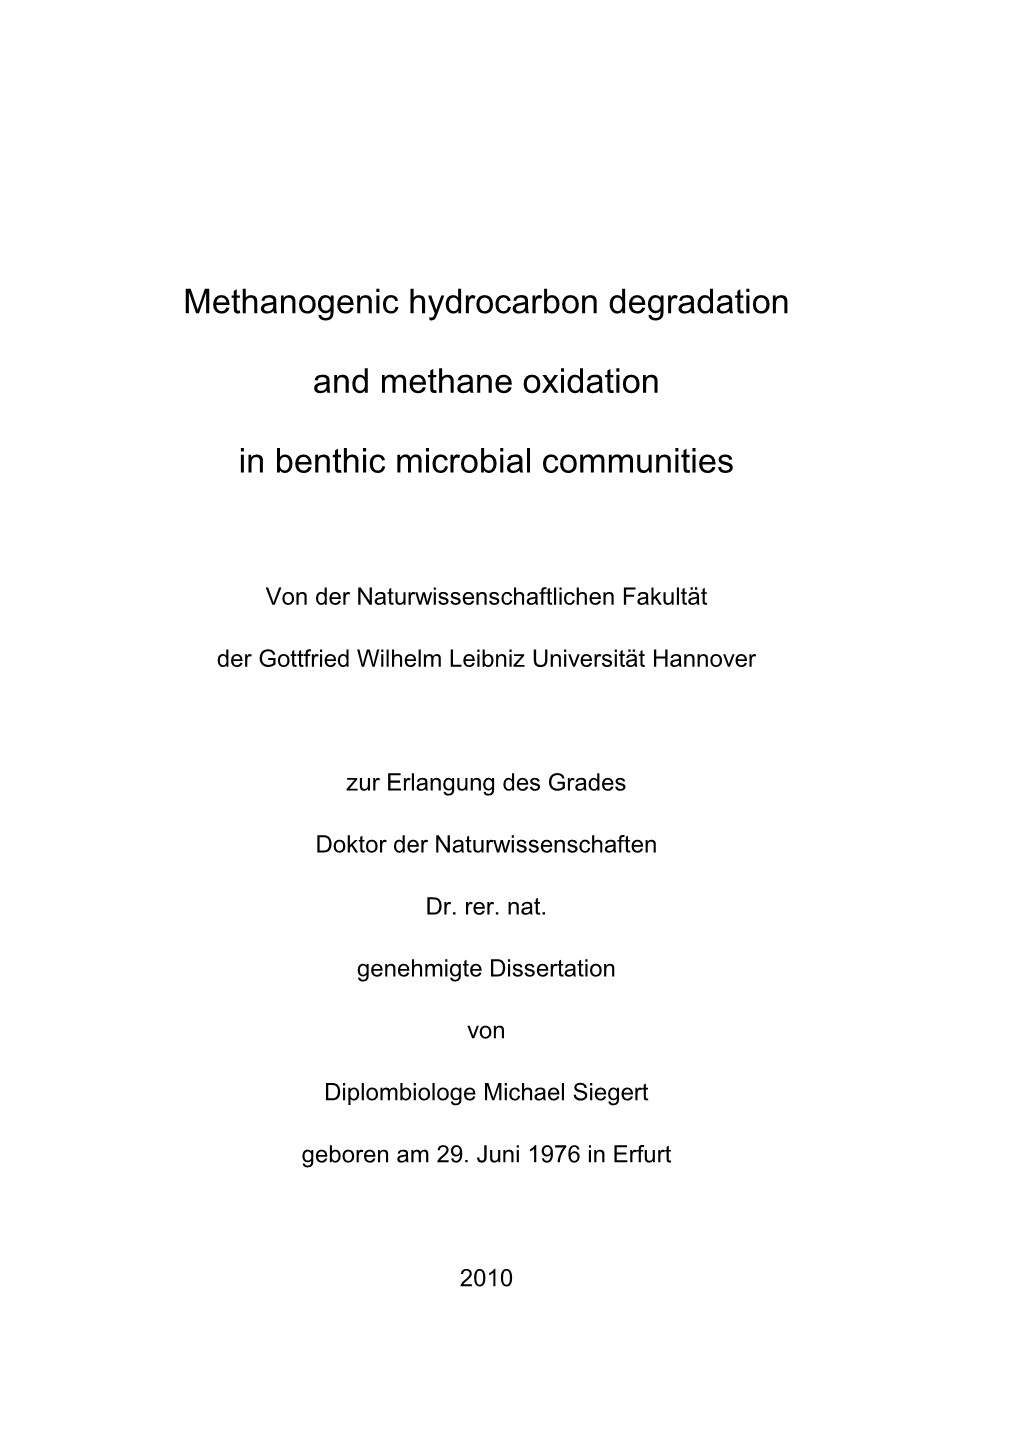 Methanogenic Hydrocarbon Degradation and Methane Oxidation in Benthic Microbial Communities” Supervisors Were Dr